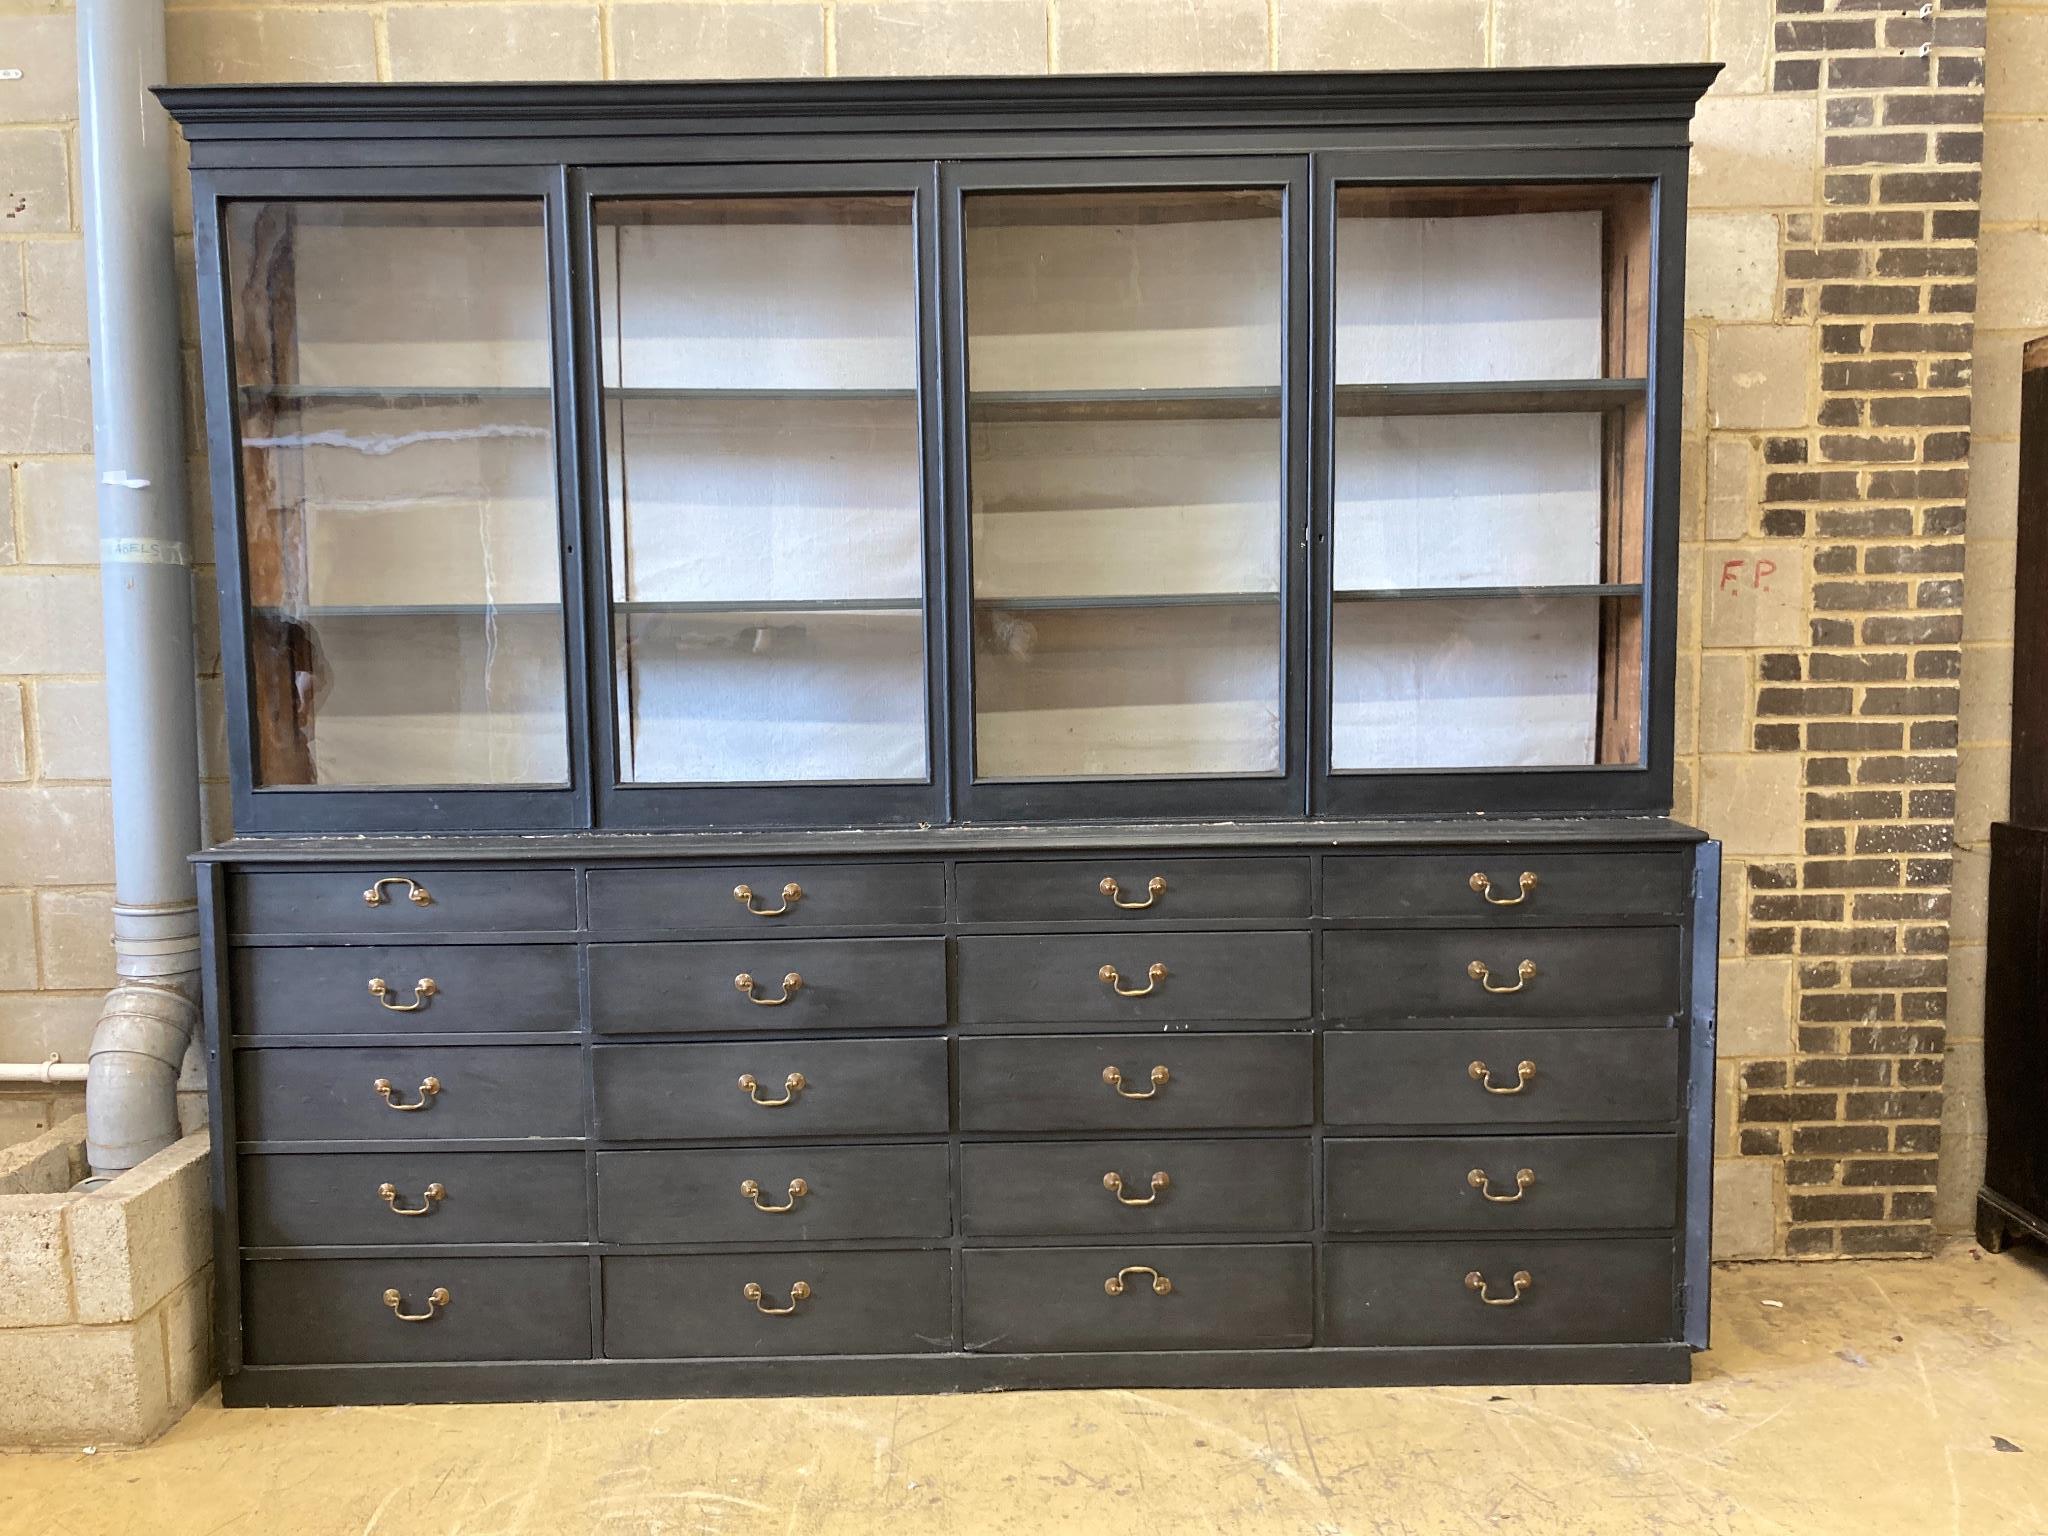 A Victorian painted pine glazed cabinet fitted twenty drawers, by repute The Bible Cabinet from Westminster Abbey, length 280cm, depth 54cm, height 244cm